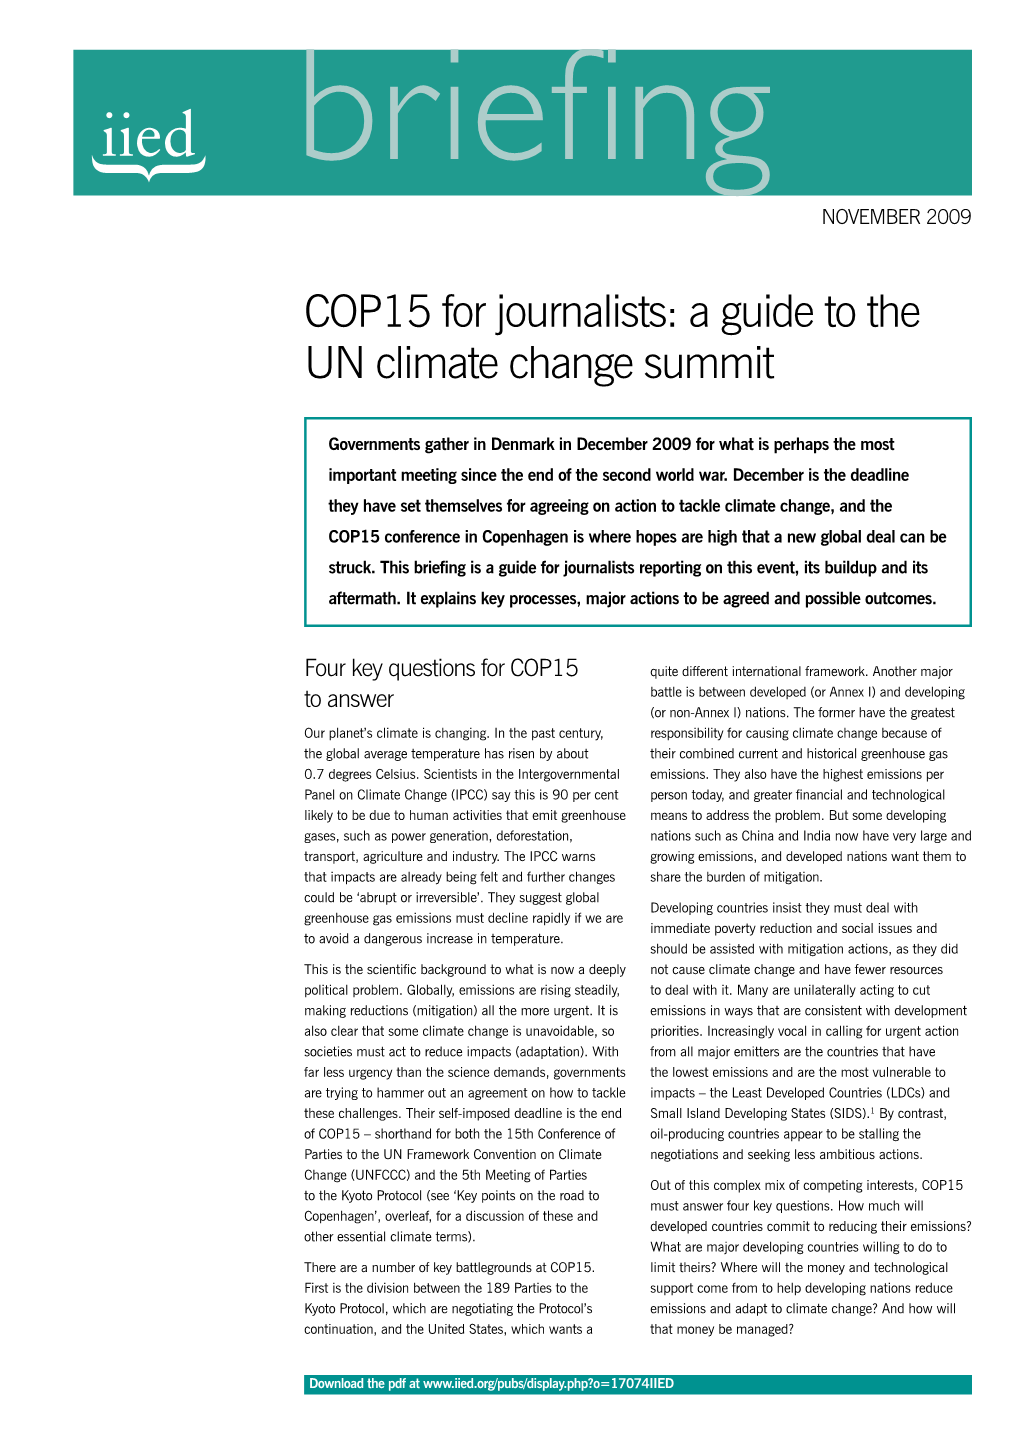 COP15 for Journalists: a Guide to the UN Climate Change Summit